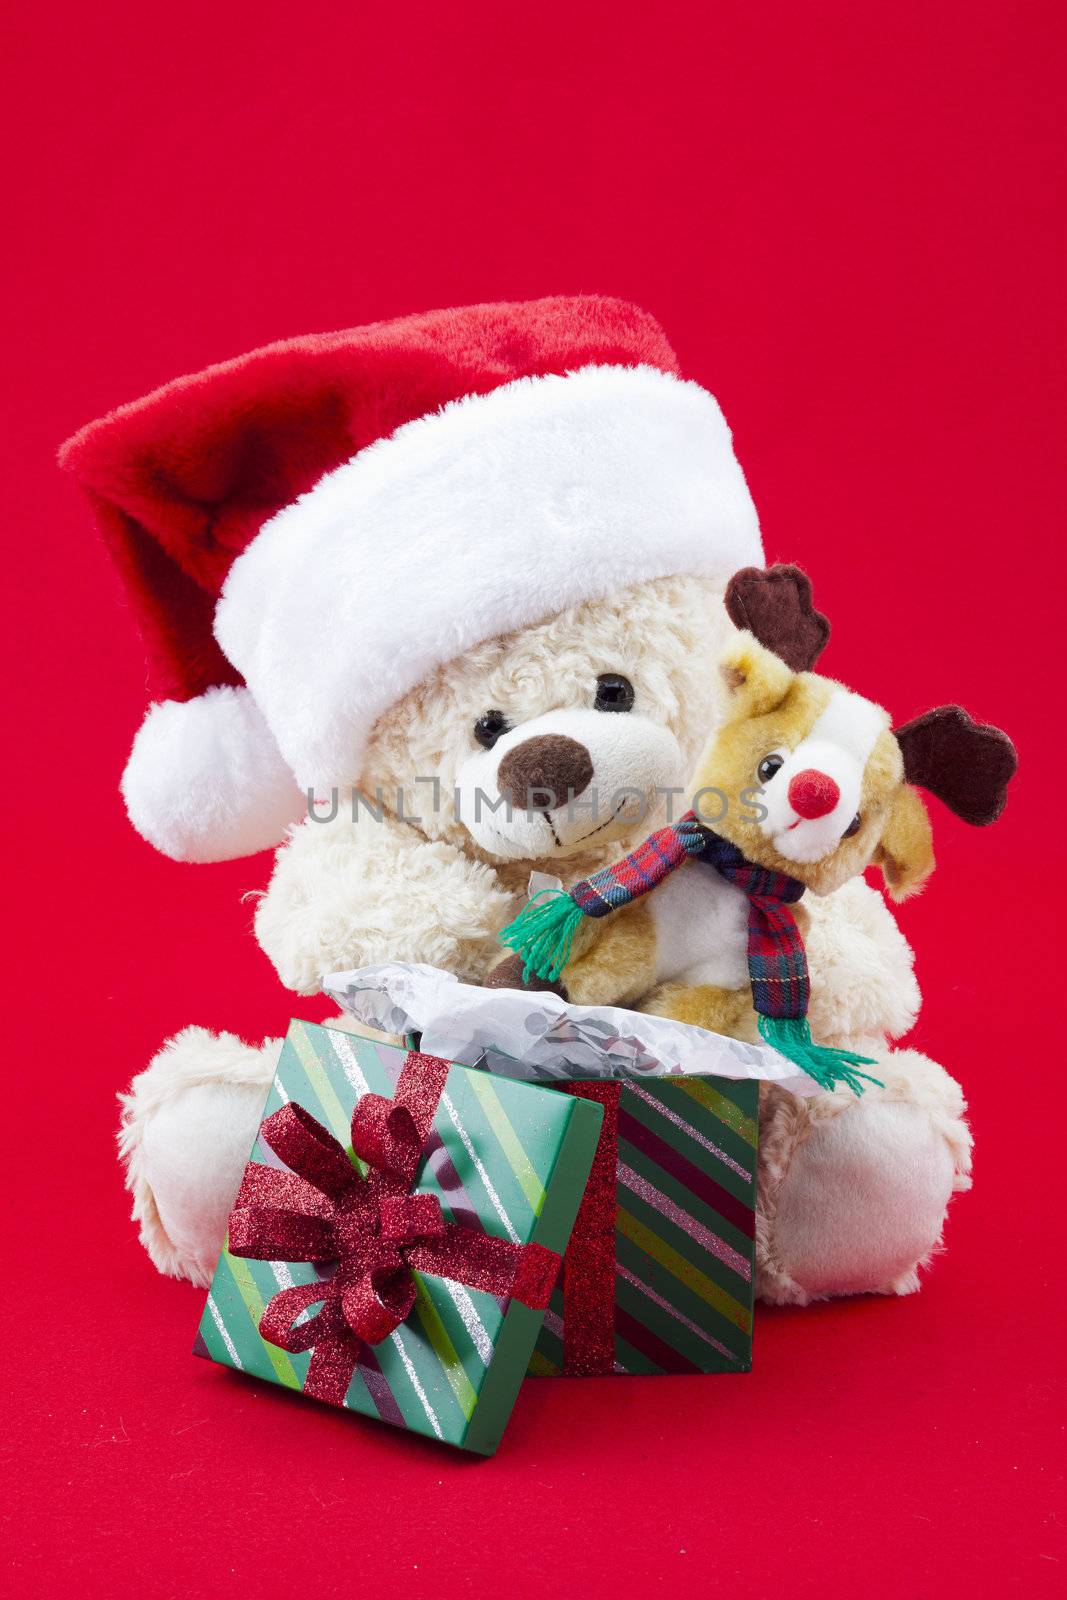 Festive themed toys sitting in front of a opened gift isolated on red.